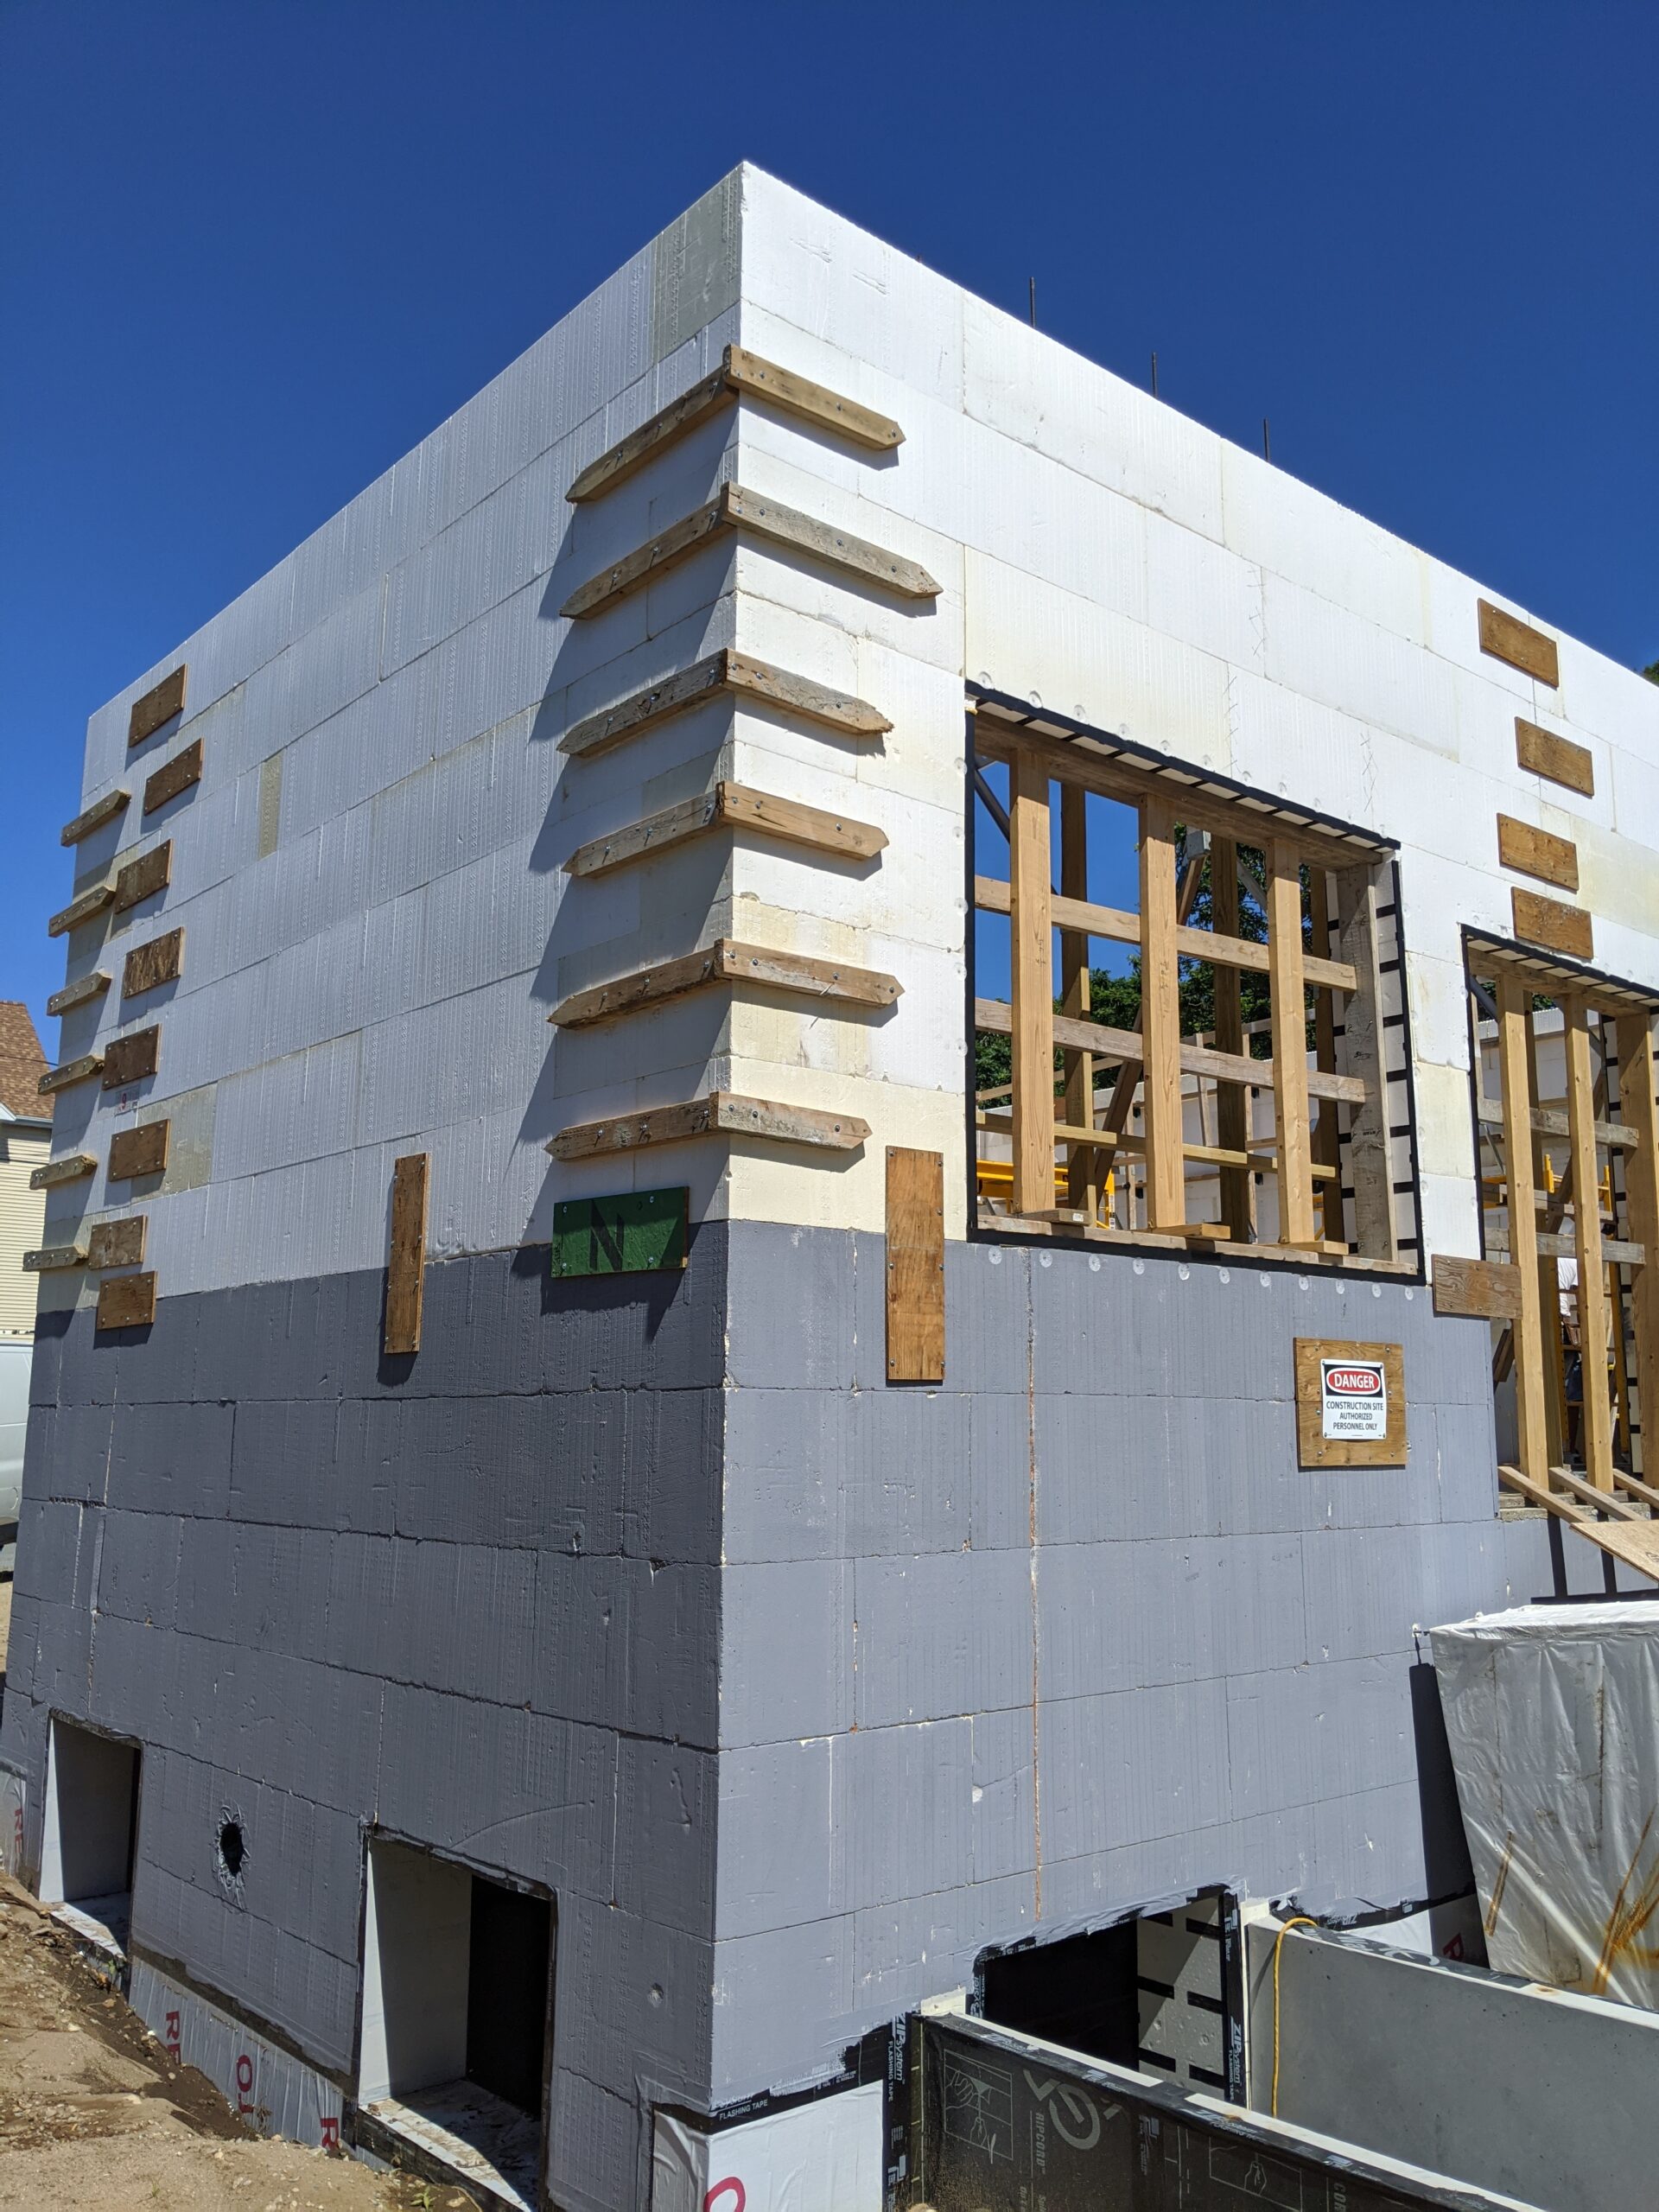 Corner view of ICF Building with an ICF Foundation and first floor secured. Image shows waterproofing at the base of the ICF Foundation of the building and a cast in place basement entrance attached to the foundation